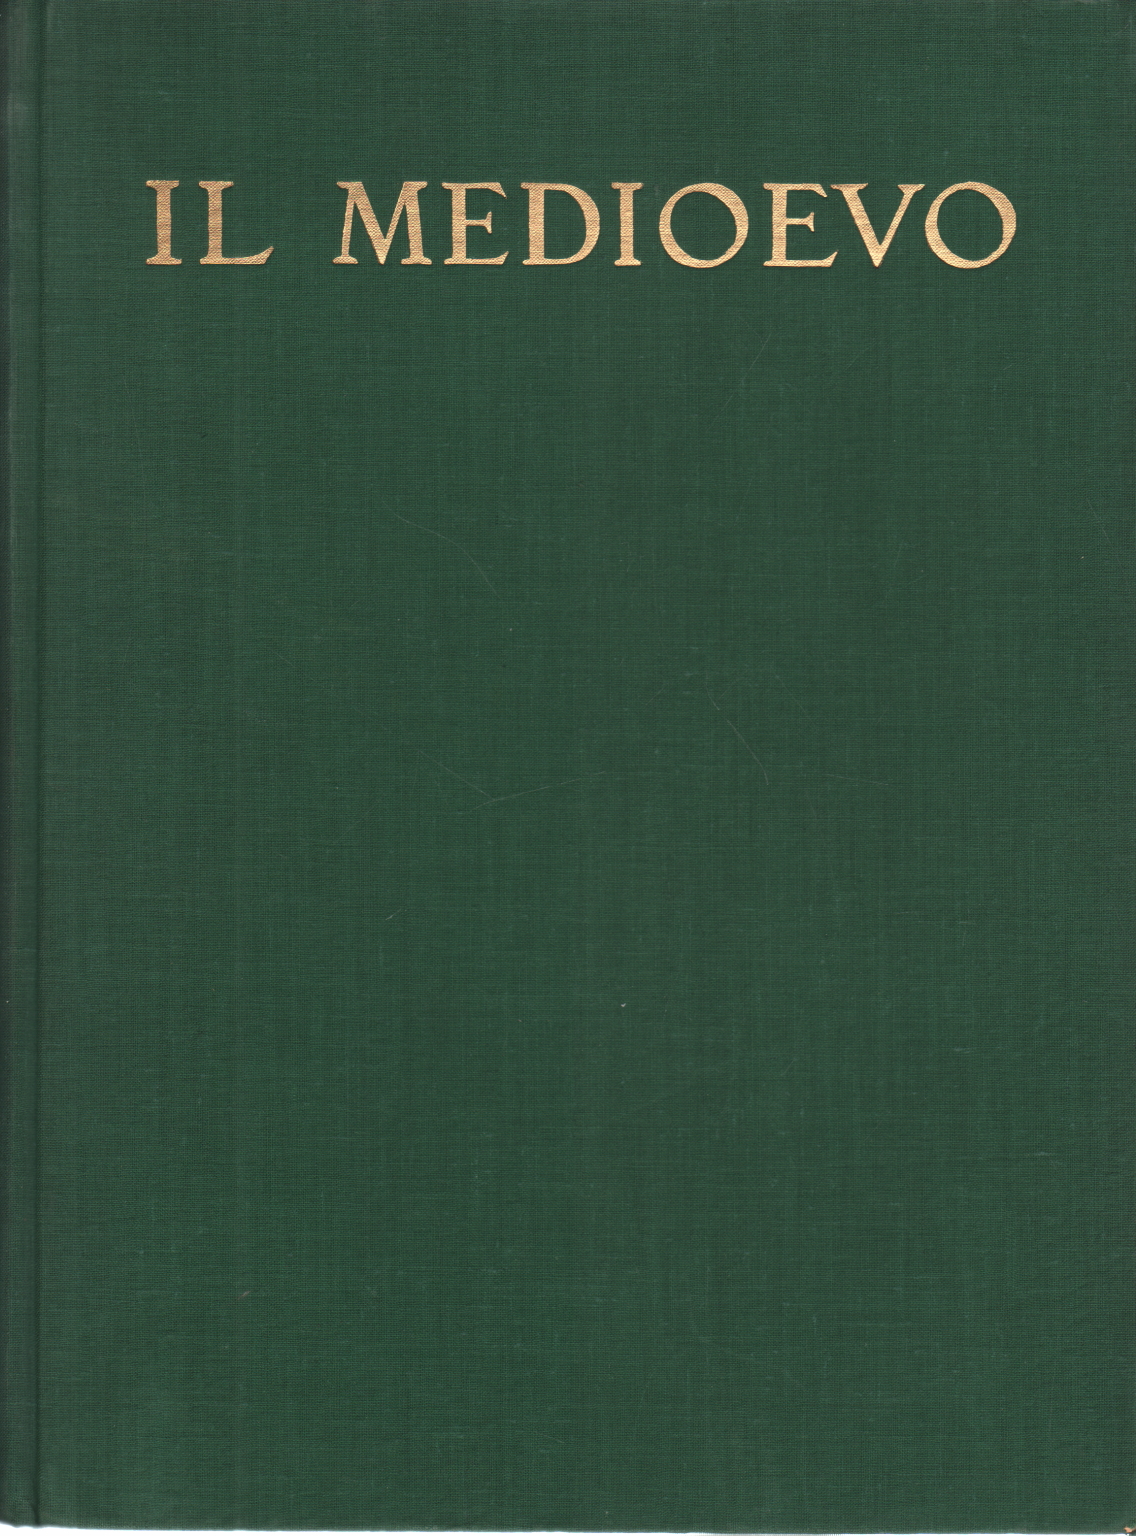 The history of medieval art and the Italian Emilio Lavagnino